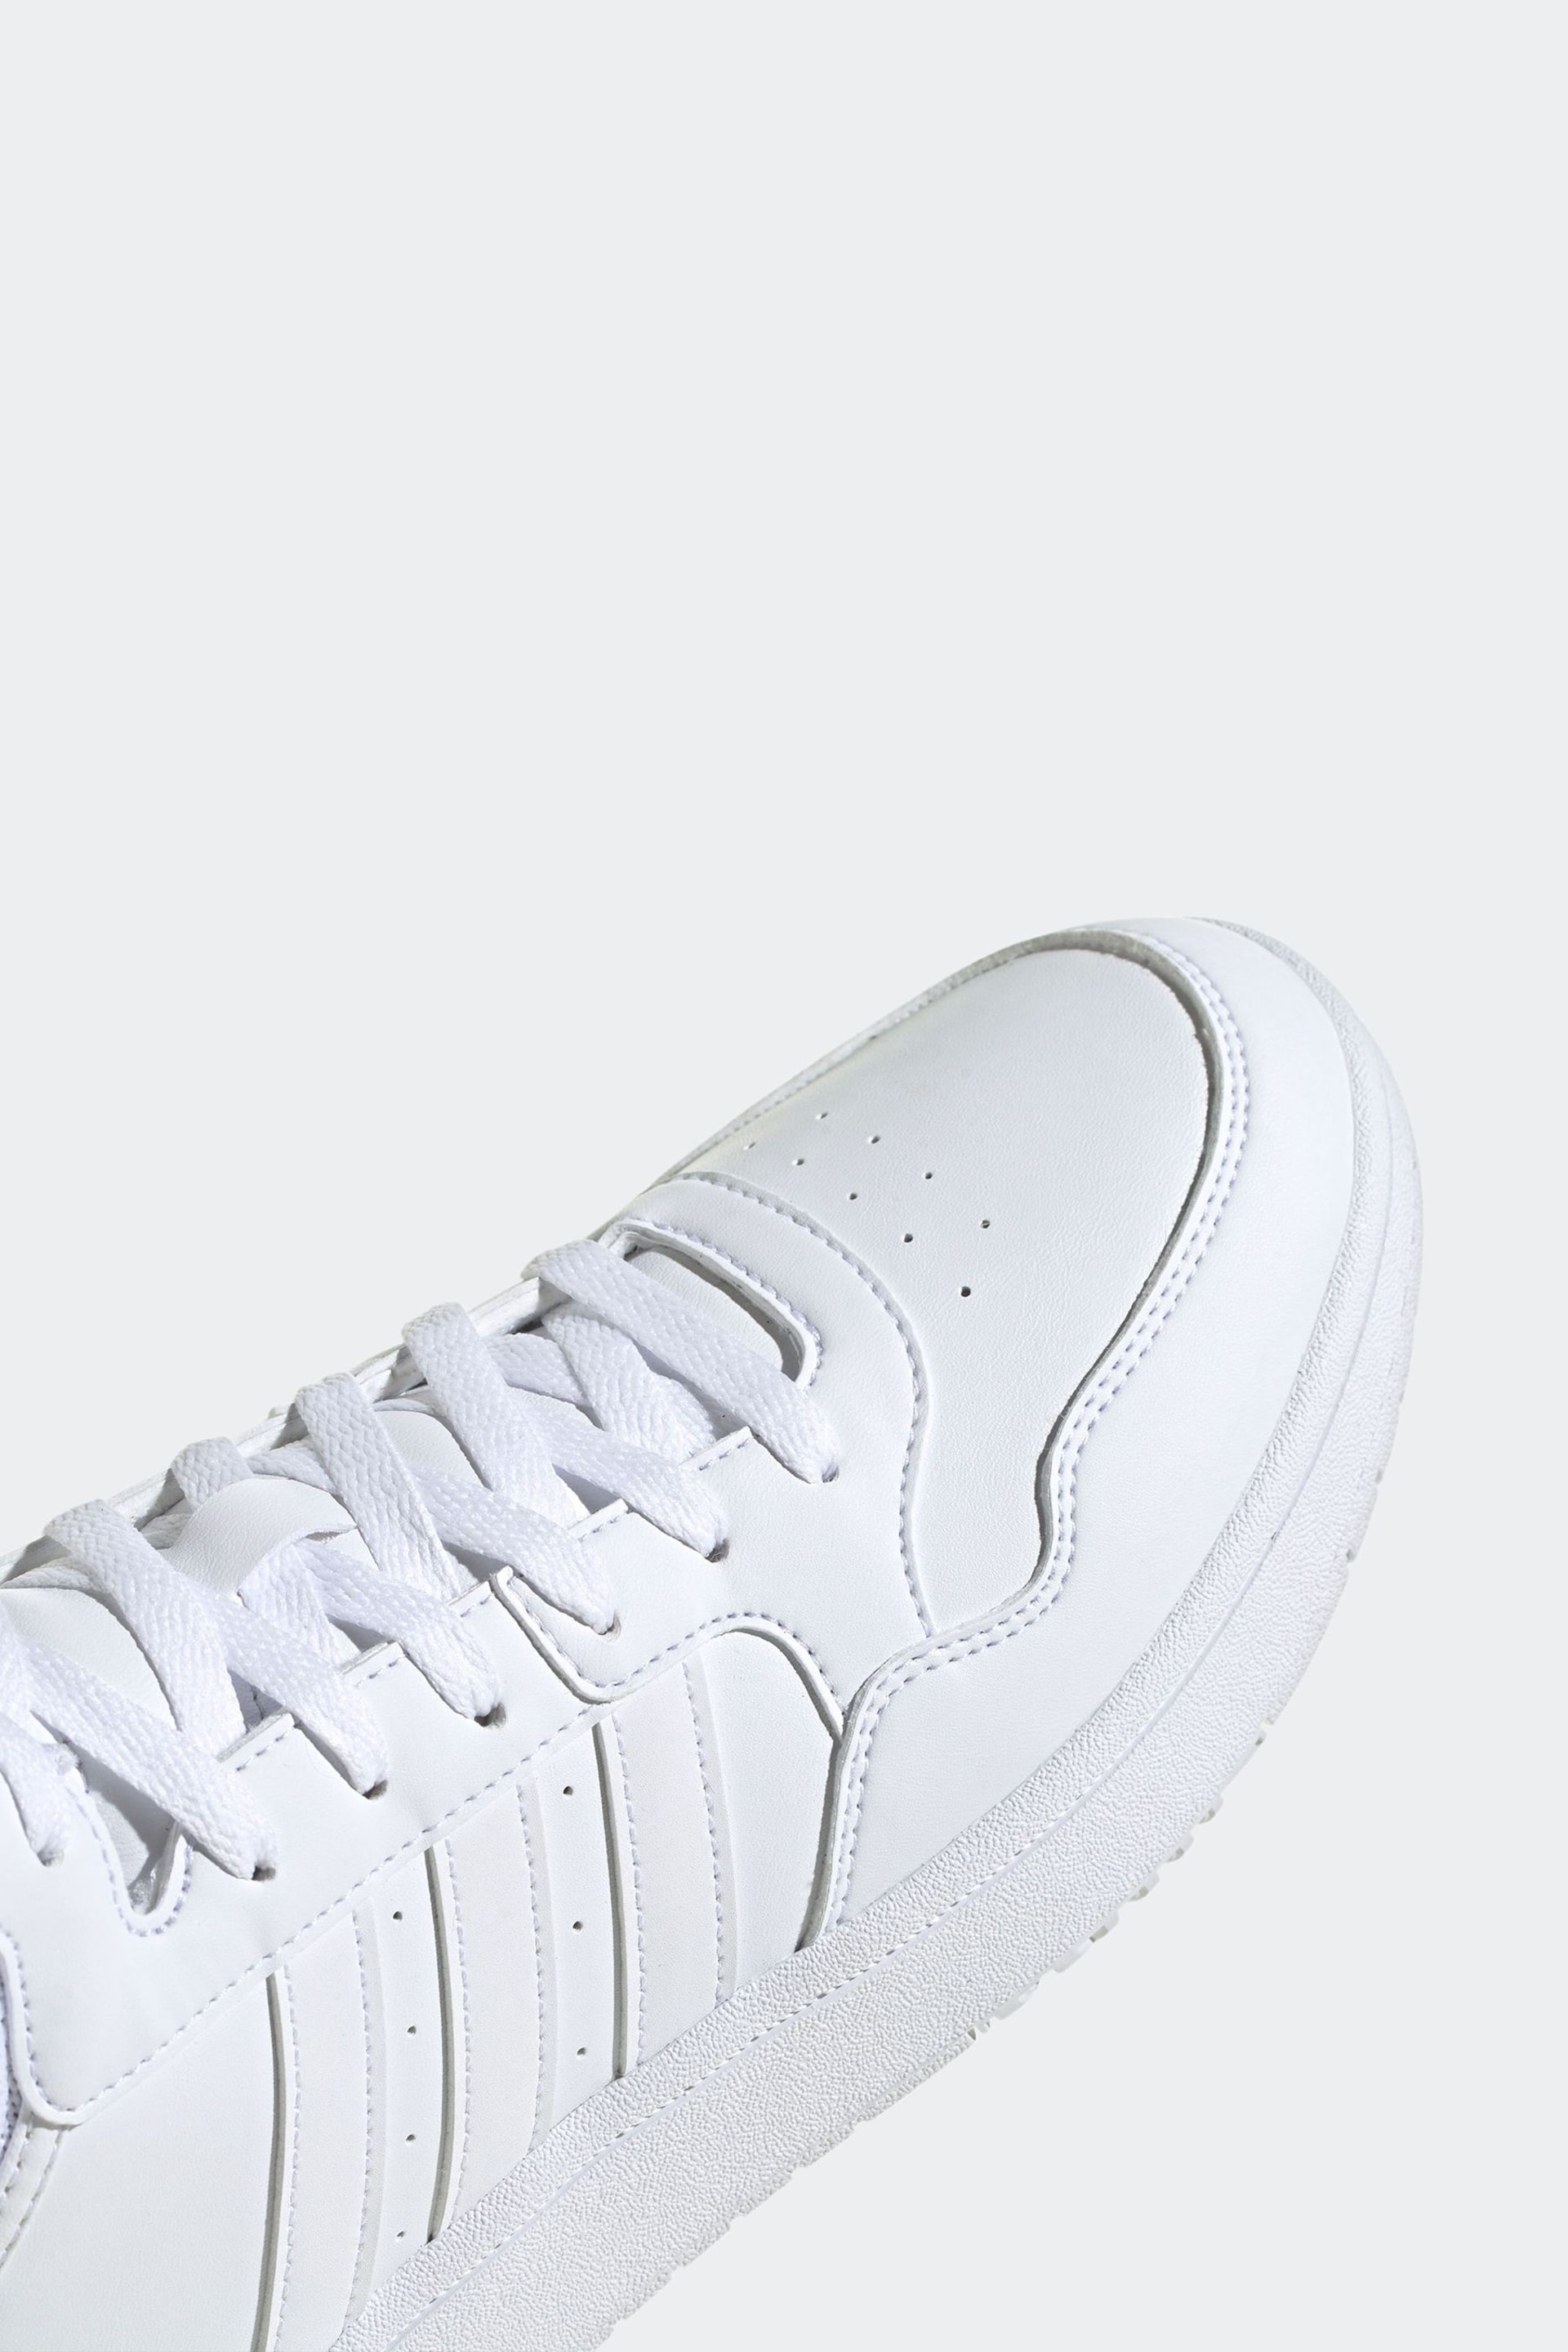 adidas White Originals Hoops 3.0 Mid Lifestyle Basketball Classic Vintage Trainers - Image 4 of 5